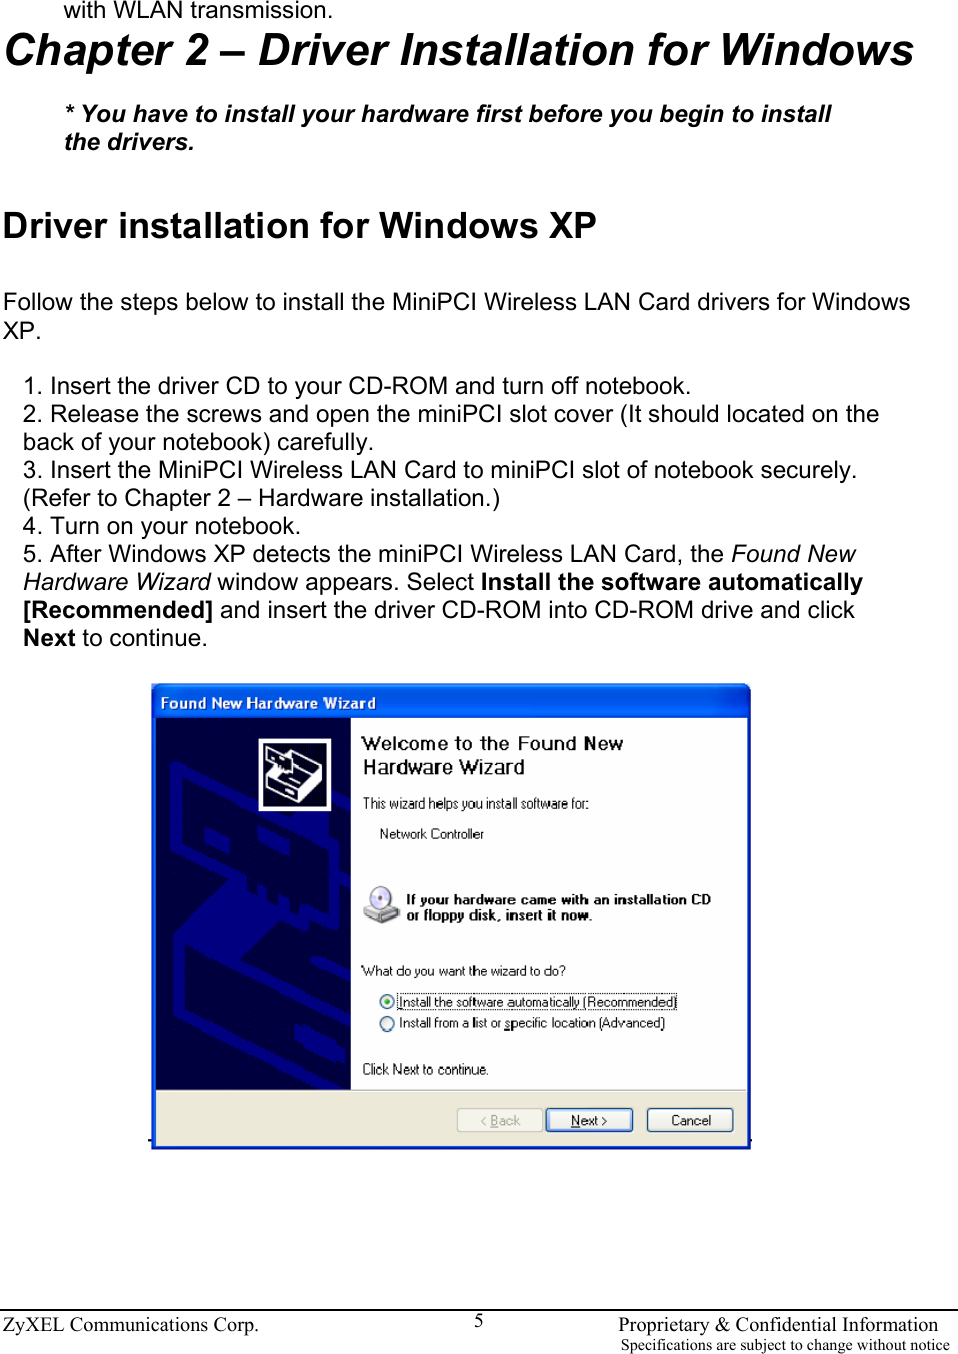  ZyXEL Communications Corp.                                                                       Proprietary &amp; Confidential Information                                                                                                                           Specifications are subject to change without notice 5 with WLAN transmission. Chapter 2 – Driver Installation for Windows  * You have to install your hardware first before you begin to install the drivers.   Driver installation for Windows XP  Follow the steps below to install the MiniPCI Wireless LAN Card drivers for Windows XP.  1. Insert the driver CD to your CD-ROM and turn off notebook. 2. Release the screws and open the miniPCI slot cover (It should located on the back of your notebook) carefully. 3. Insert the MiniPCI Wireless LAN Card to miniPCI slot of notebook securely. (Refer to Chapter 2 – Hardware installation.) 4. Turn on your notebook. 5. After Windows XP detects the miniPCI Wireless LAN Card, the Found New Hardware Wizard window appears. Select Install the software automatically [Recommended] and insert the driver CD-ROM into CD-ROM drive and click Next to continue.        